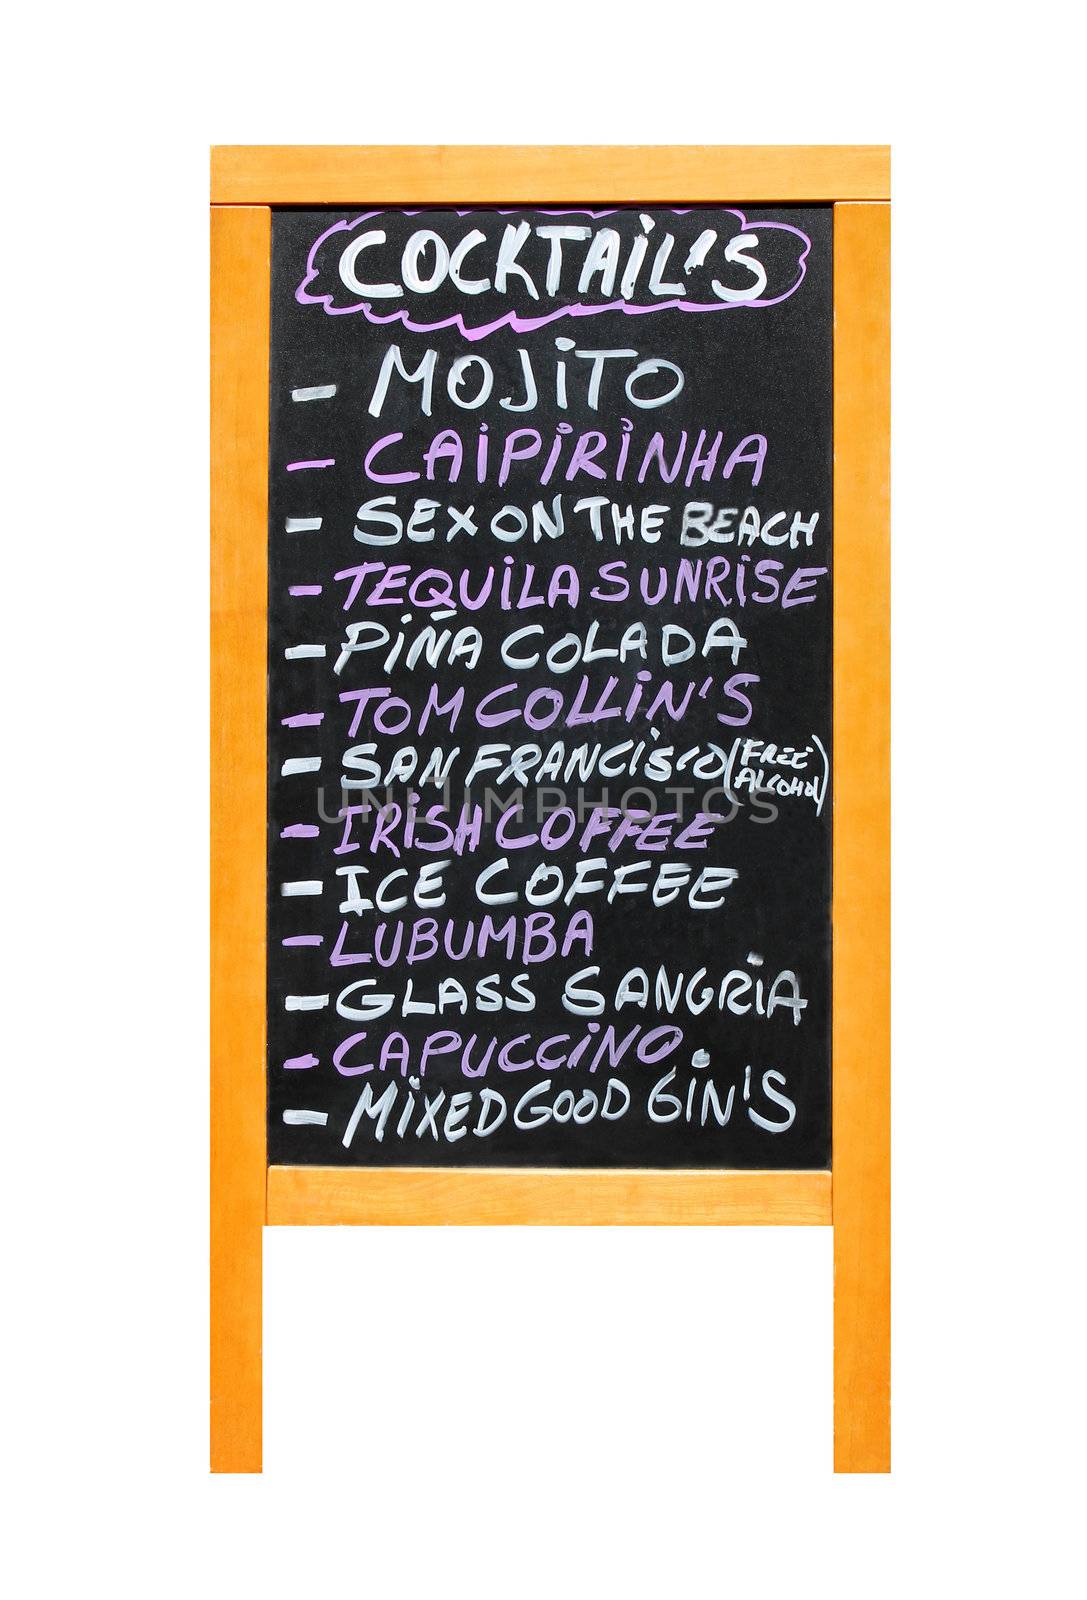 List of different cocktail drinks on advertising board, isolated on white background.